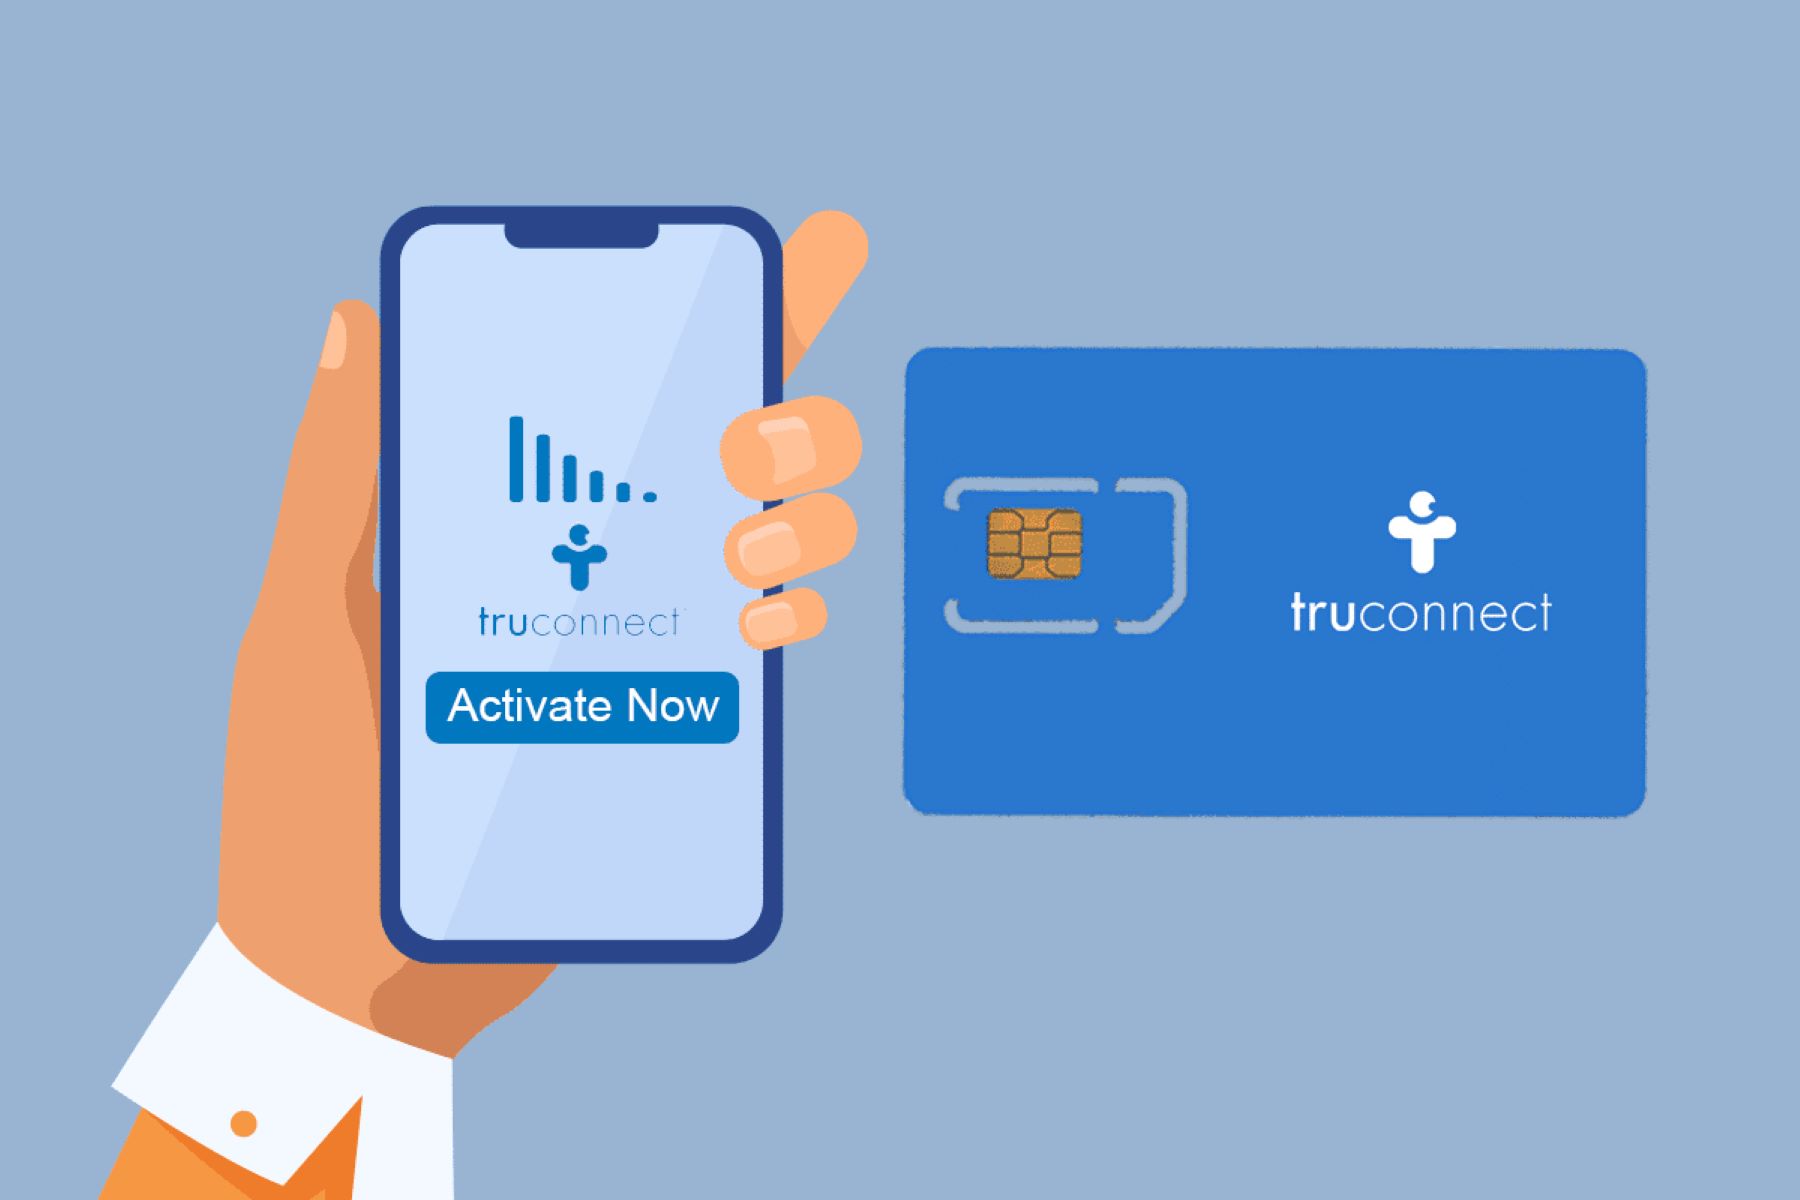 Truconnect SIM Card Usage Tips And Tricks